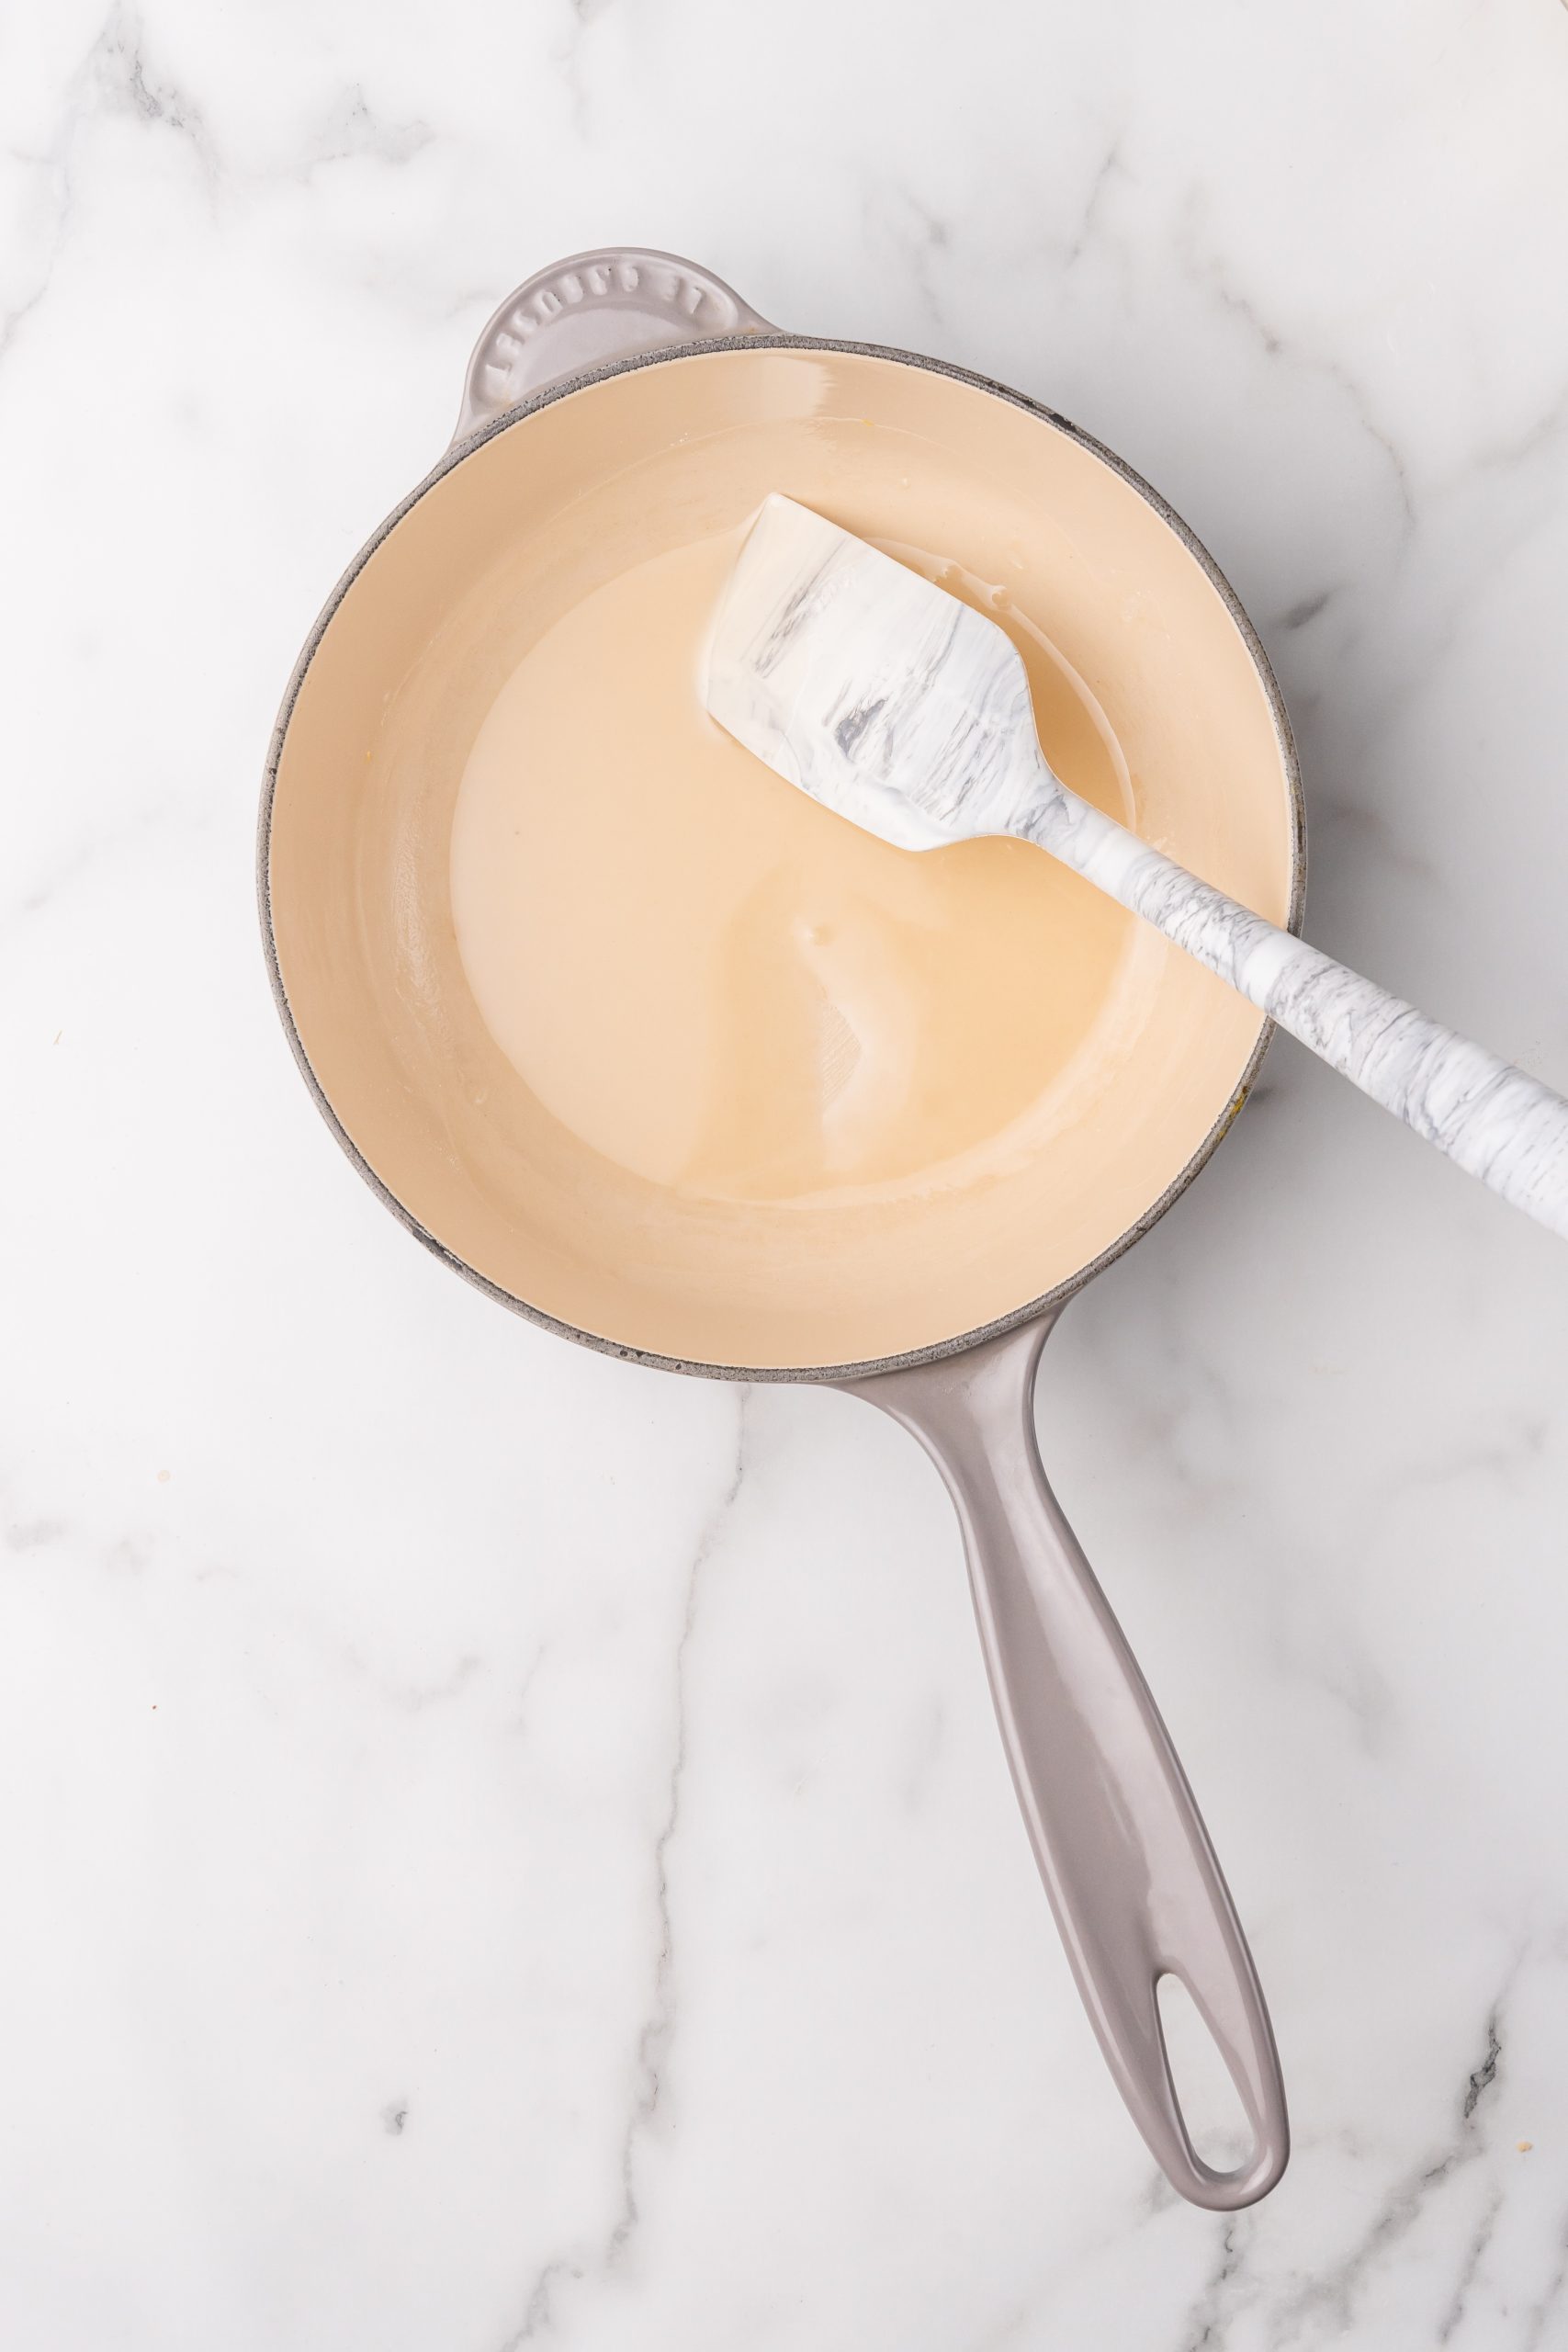 a roux in a small gray sauce pan